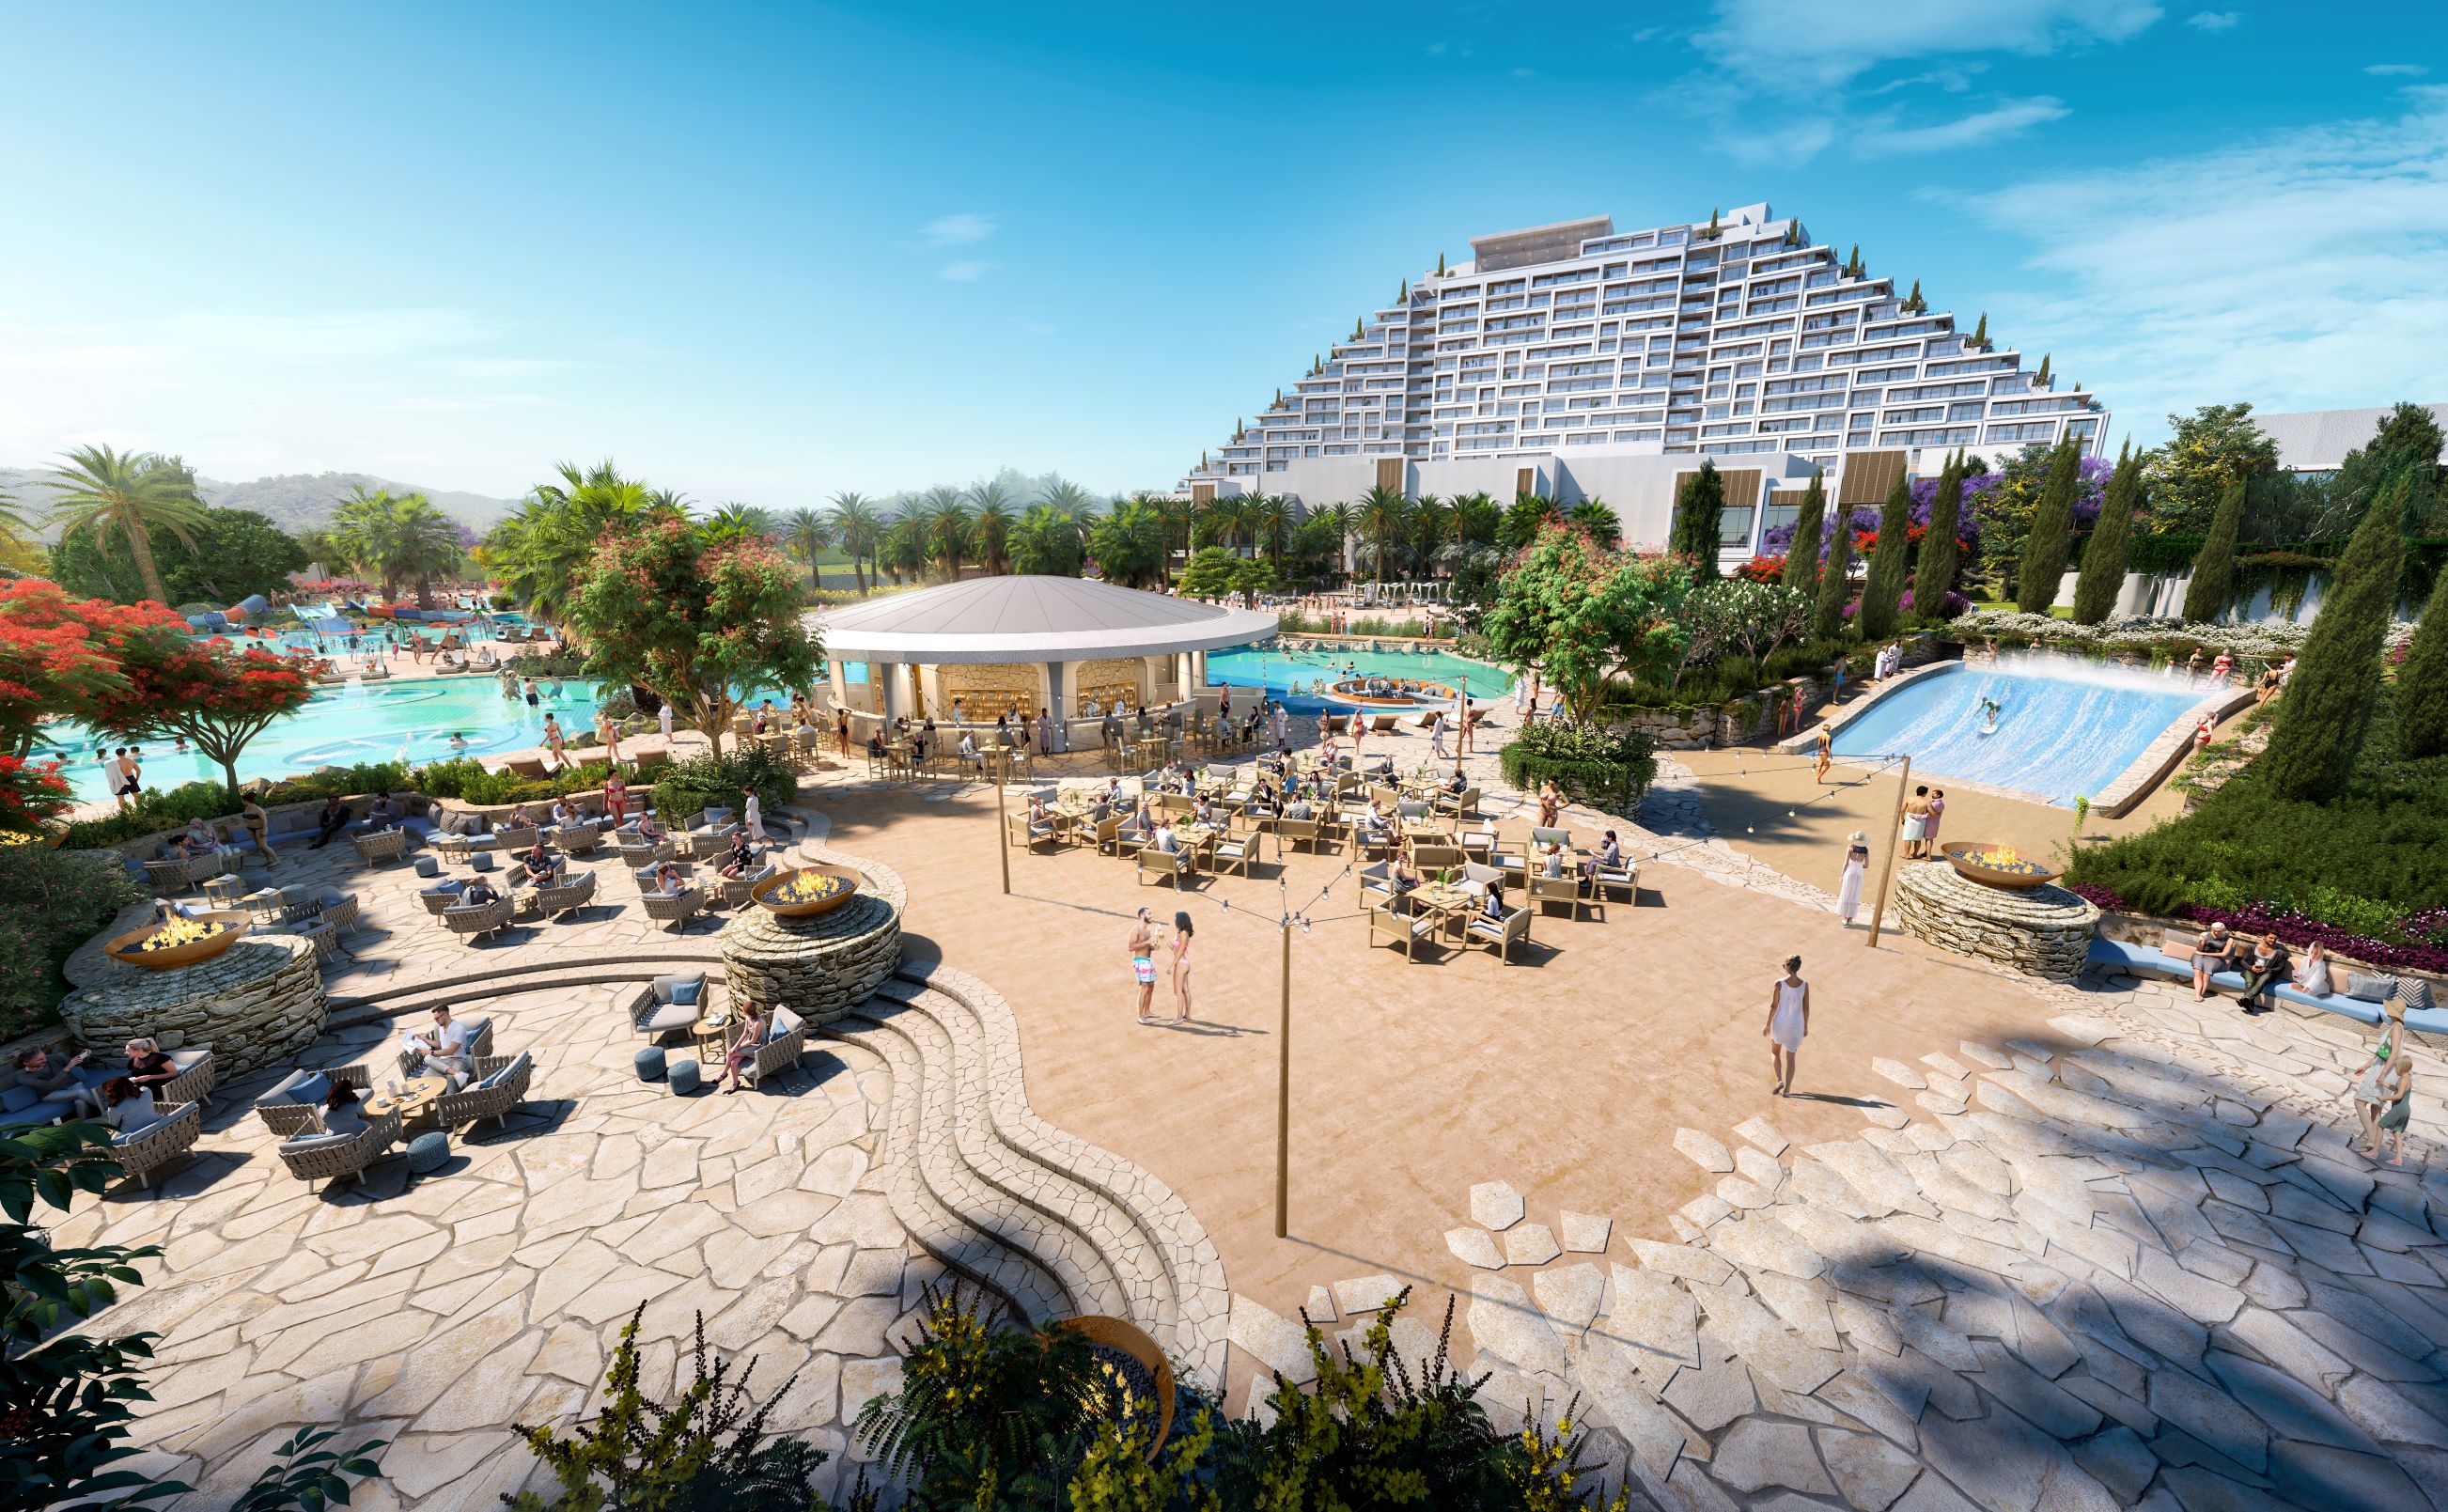 Europe's largest integrated resort is set to redefine the island's tourism and hospitality sectors.